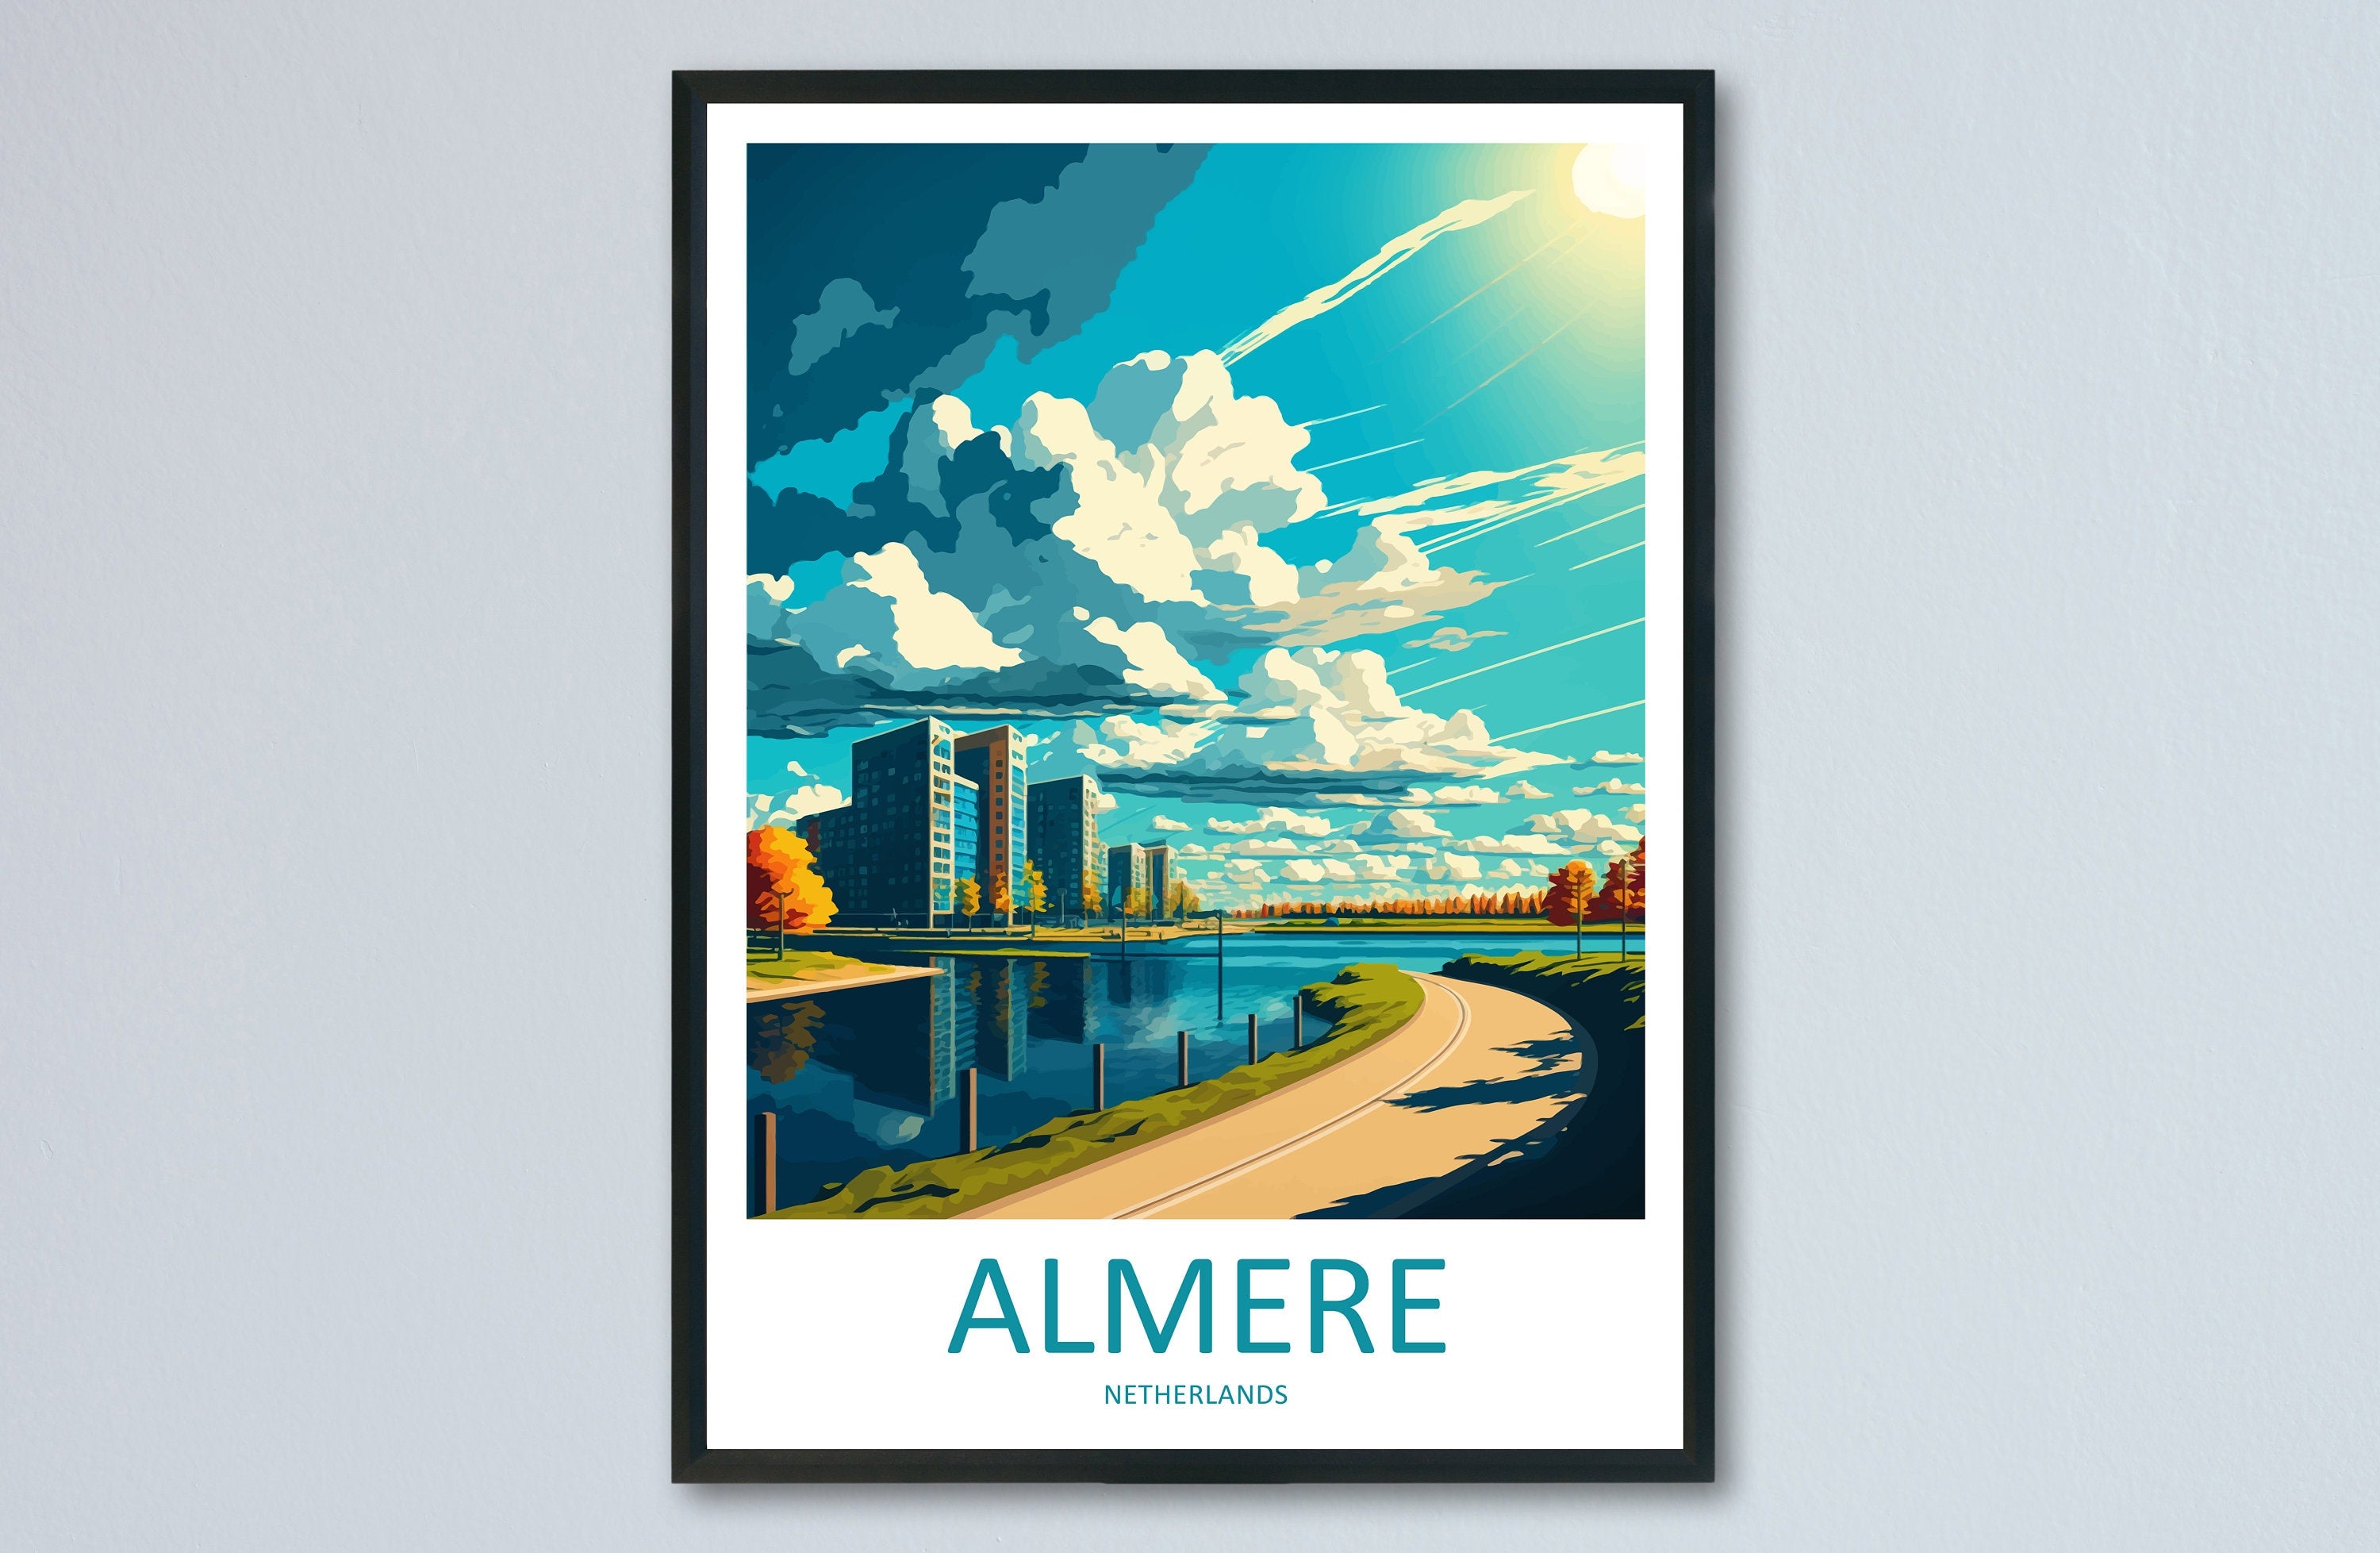 Almere Travel Print Wall Art Almere Wall Hanging Home Décor Almere Gift Art Lovers Netherlands Art Lover Gift Almere Travel Art